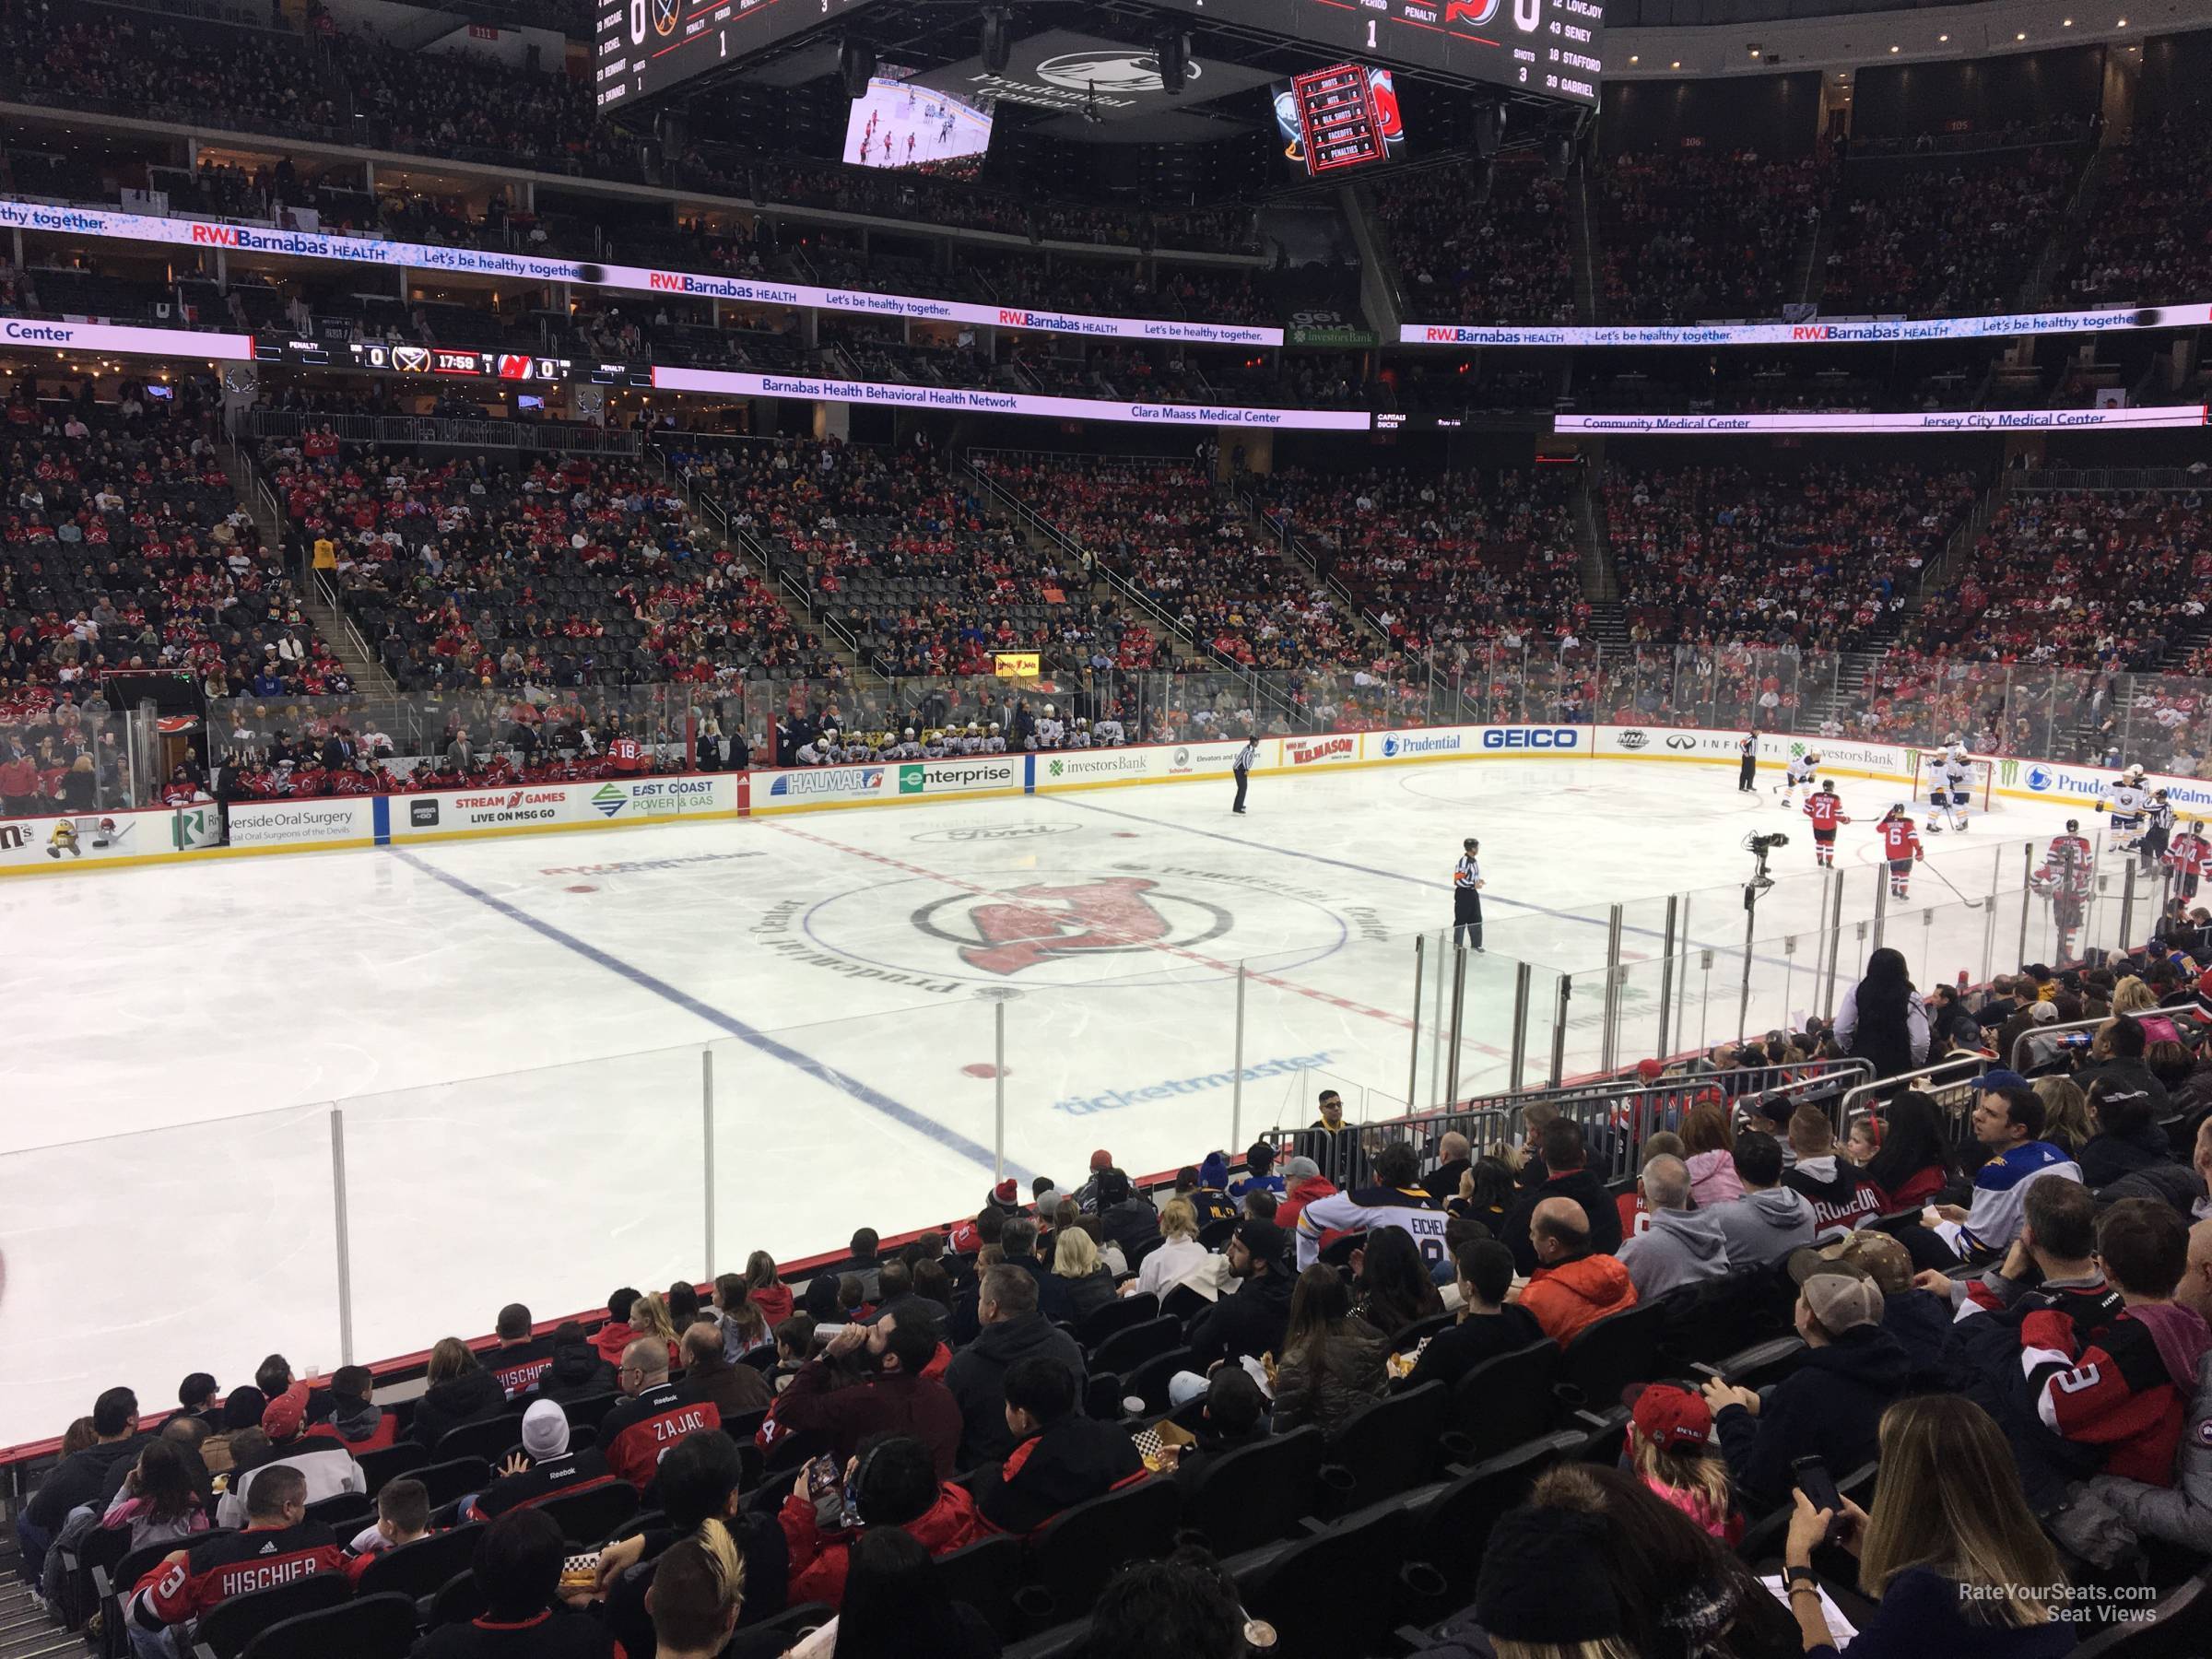 Section 18 at Prudential Center 